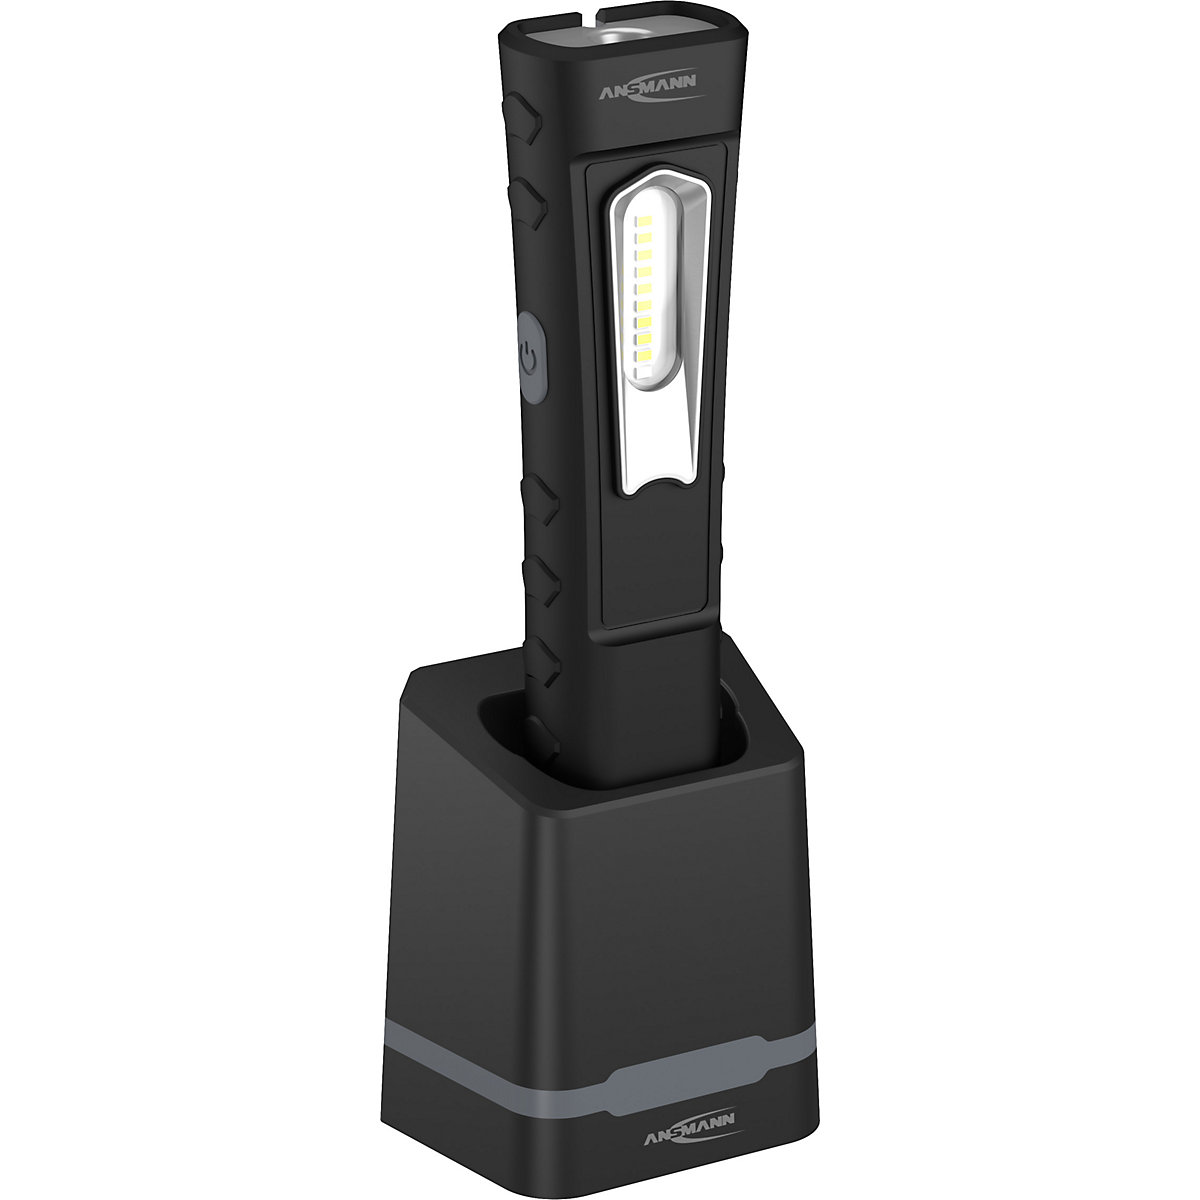 WL1000R rechargeable work light – Ansmann: with charging station, 1000 lm